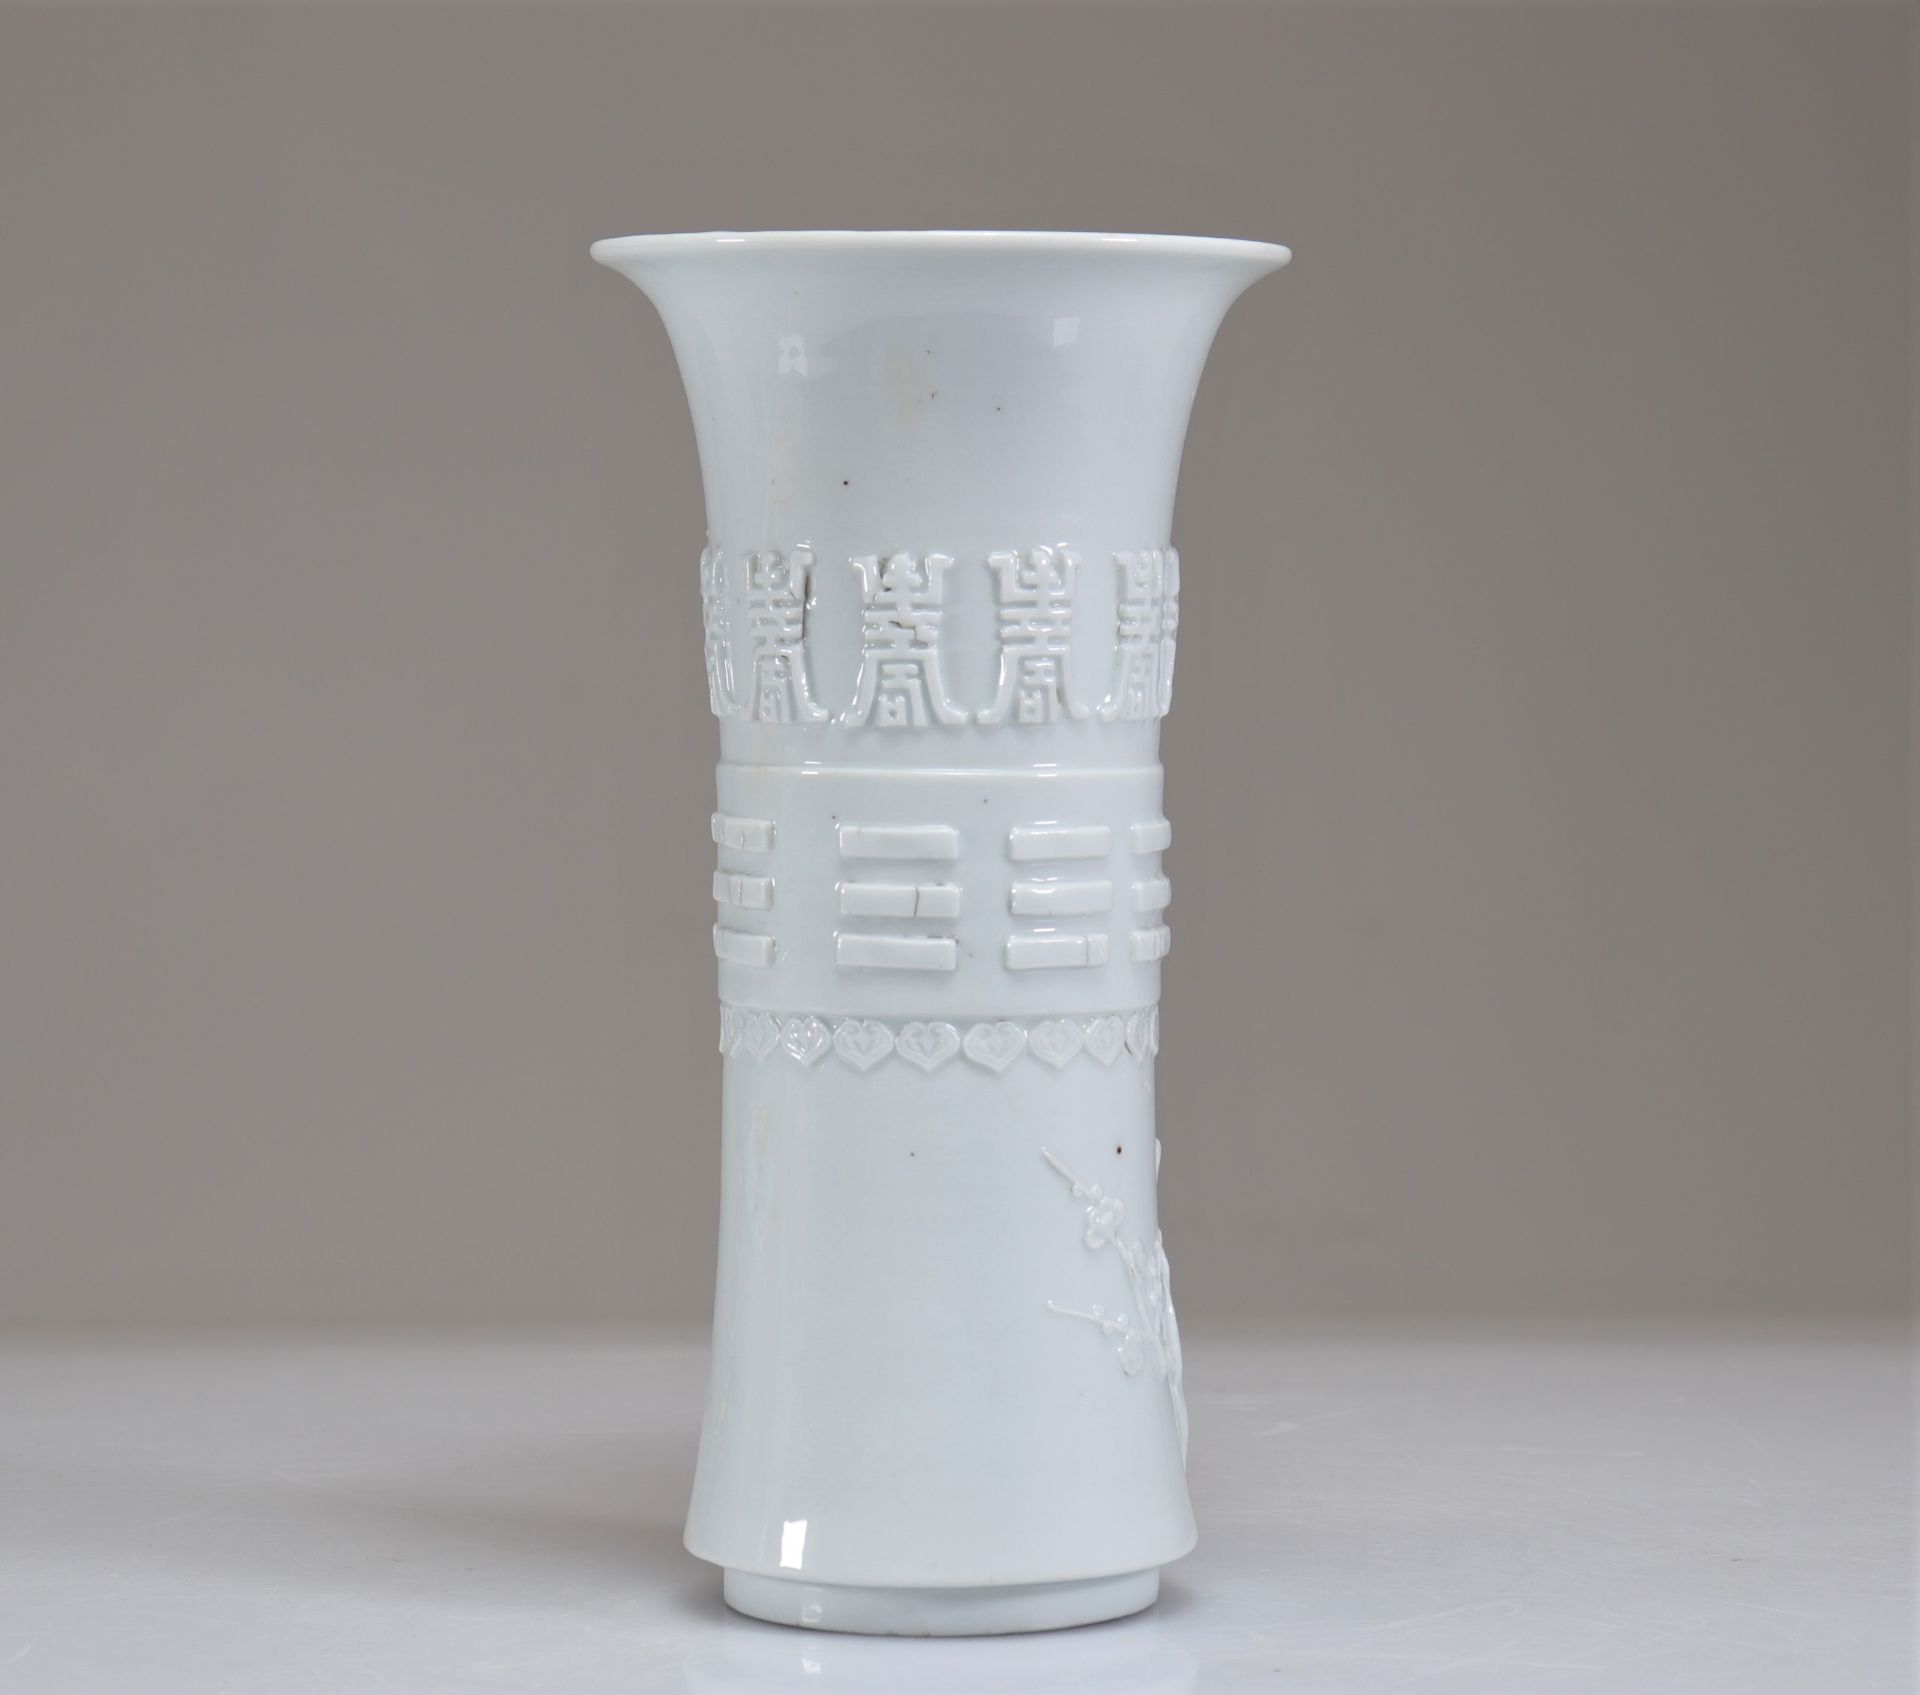 Rare white Gu-shaped vase decorated with characters, Qing period, 18th century - Image 3 of 5